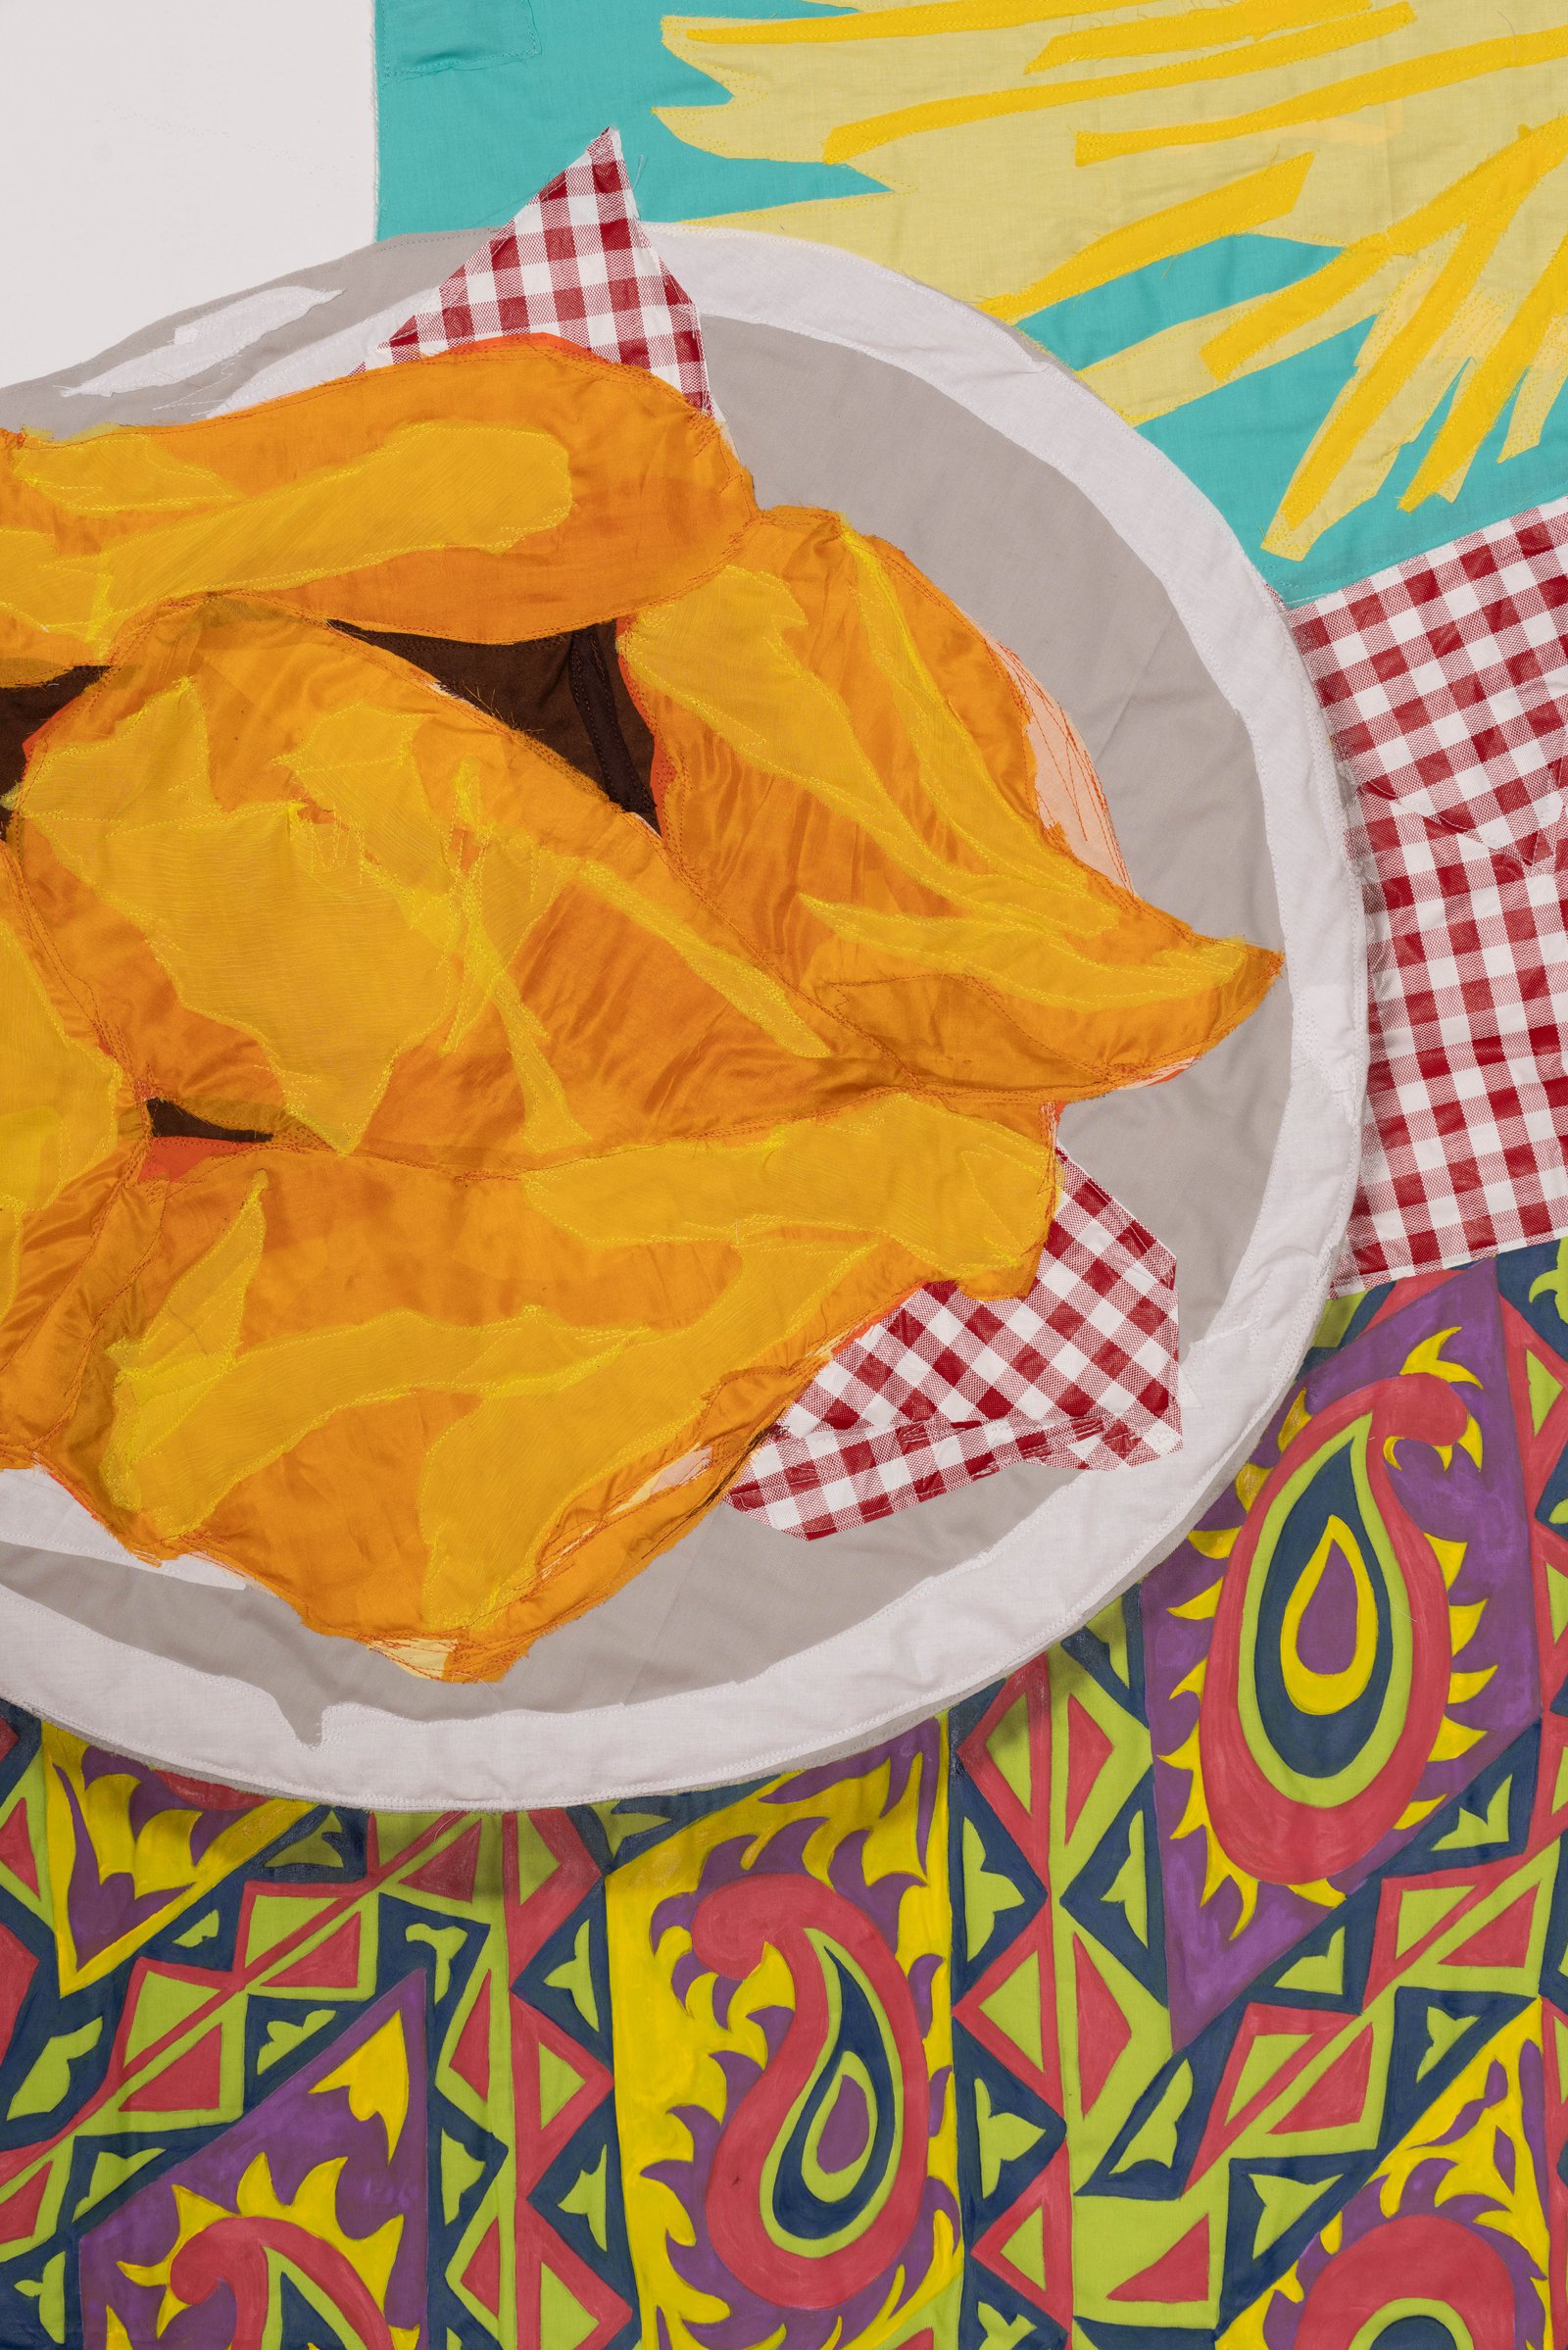 Hangama AmiriStill-Life with Fried Chicken and Fries, 2021Chiffon, muslin, cotton, polyester, silk, acrylic paint, and found fabric.114.30 × 99.06 cm (45 × 39 in)Courtesy of the artist and T293 Gallery.